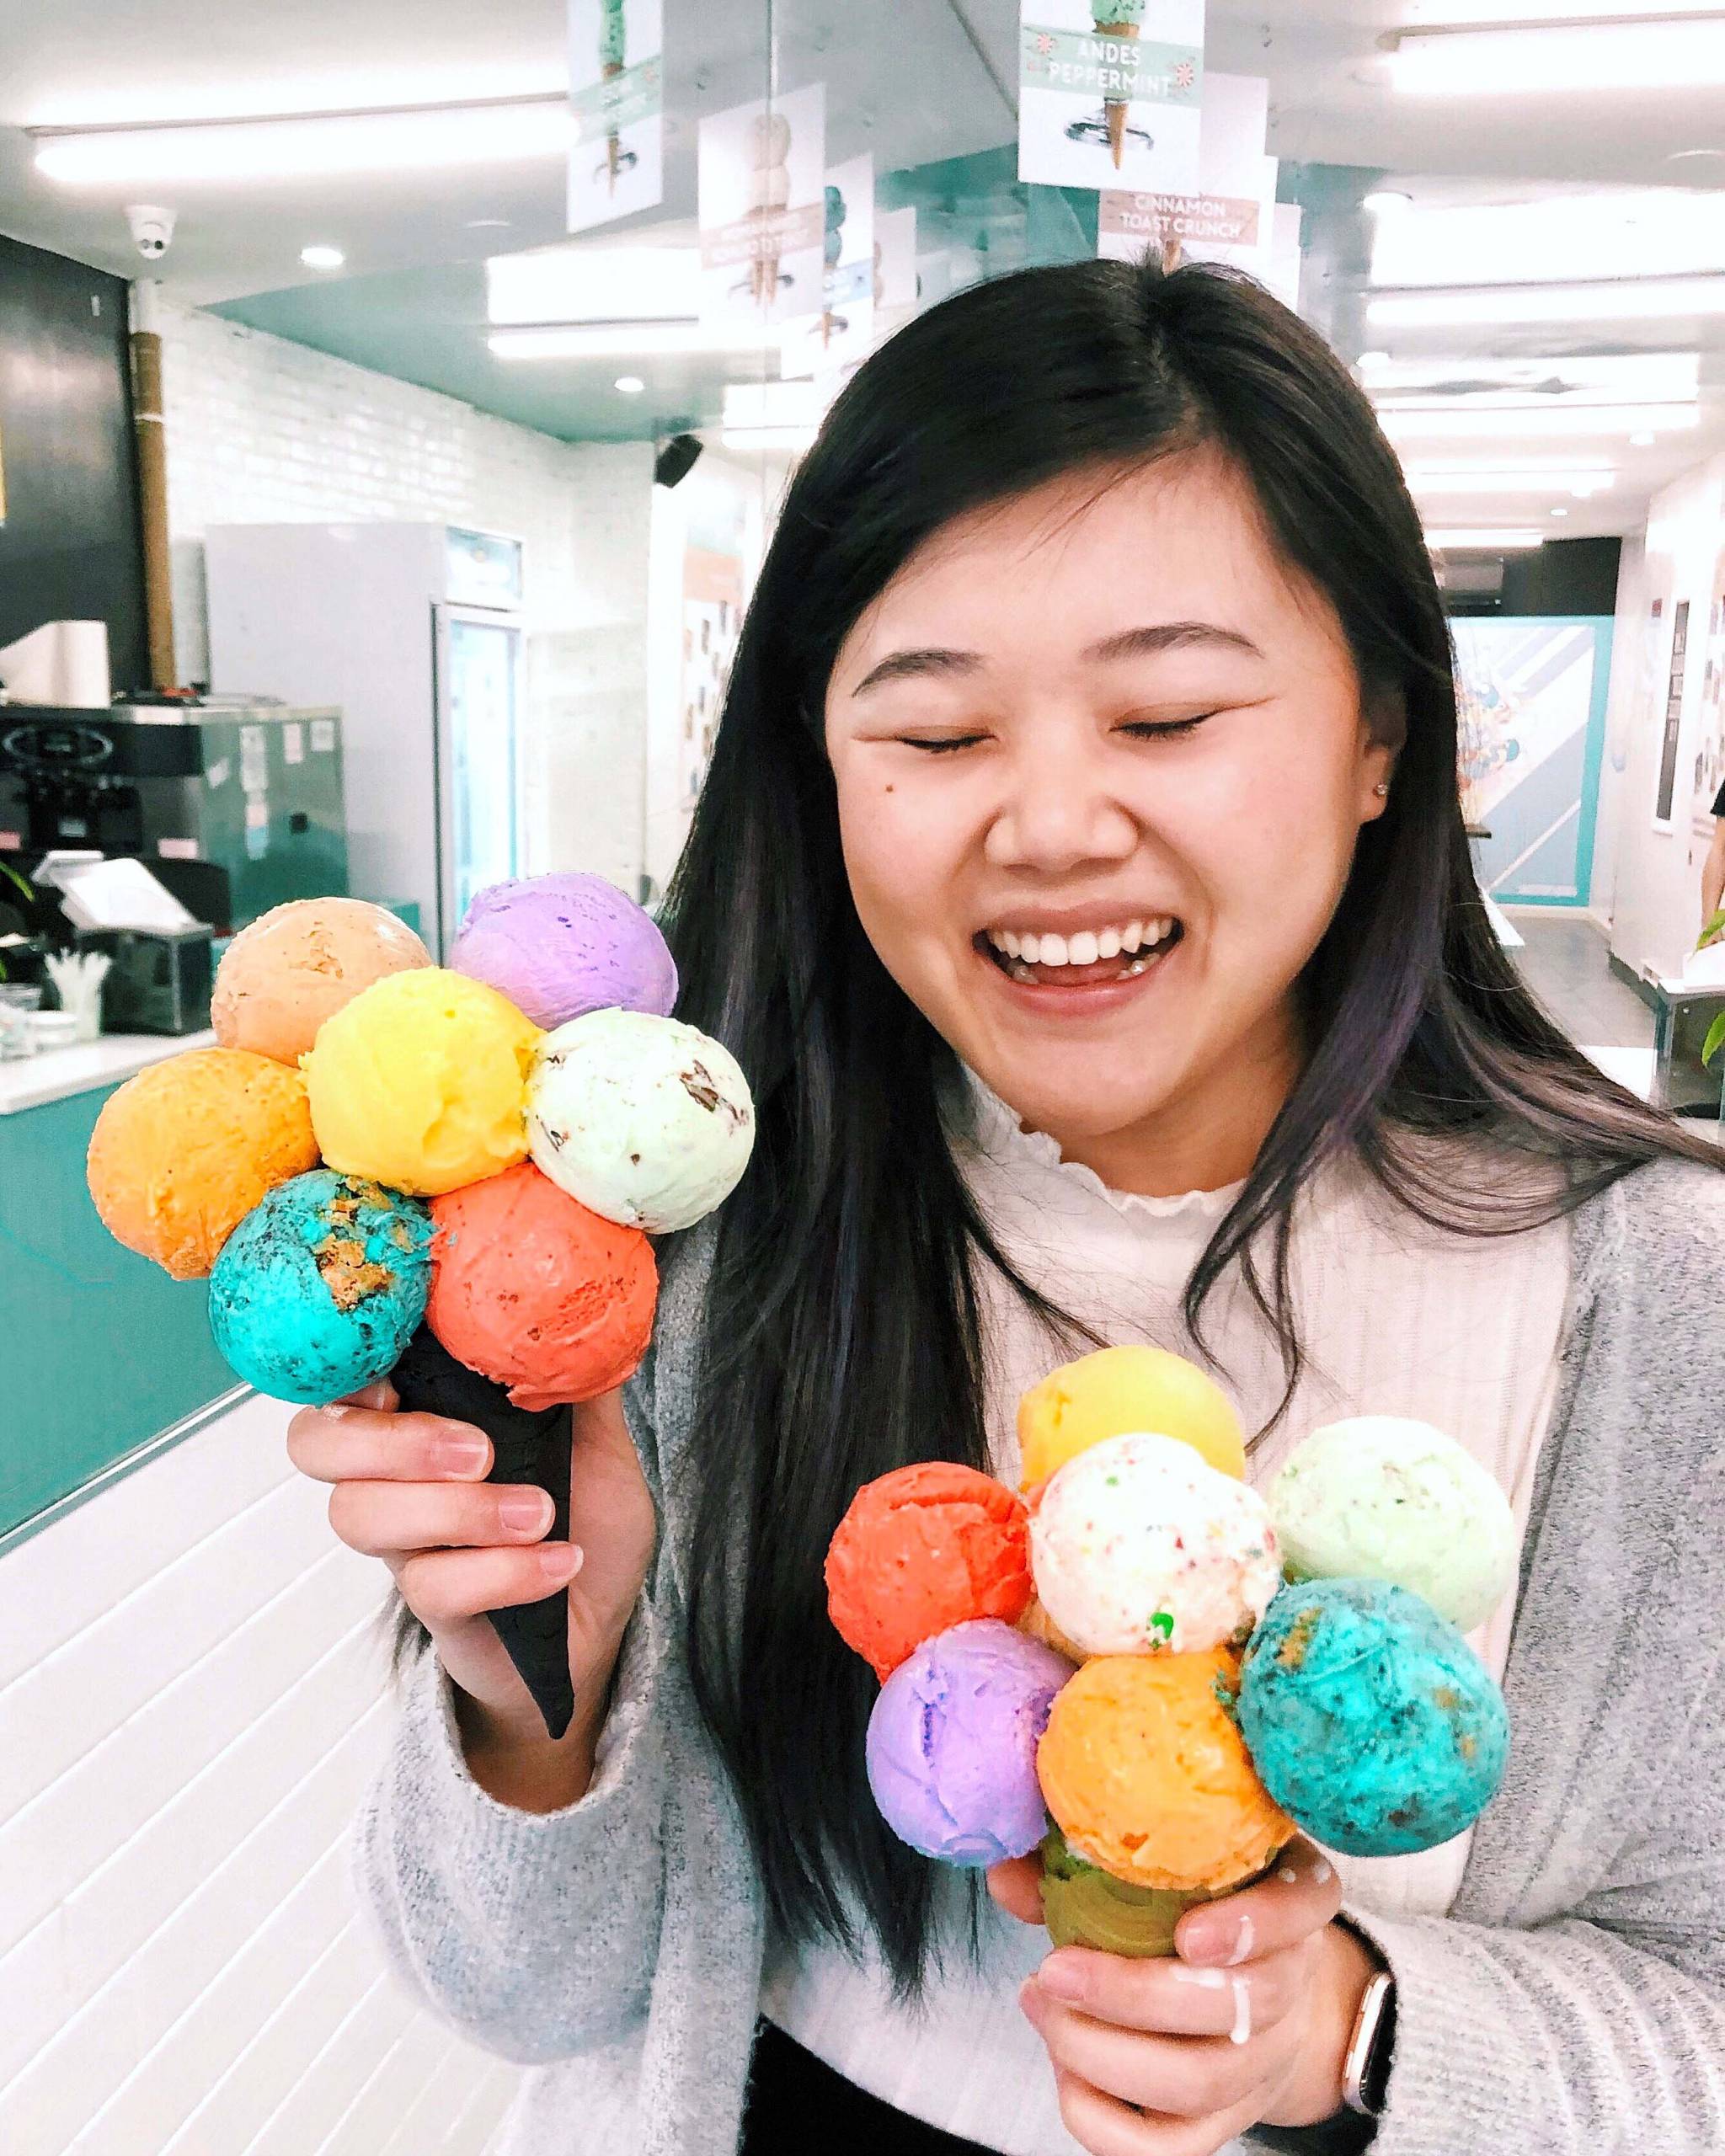 A woman smiles holding a colorful, seven-scoop ice cream cone in each hand.